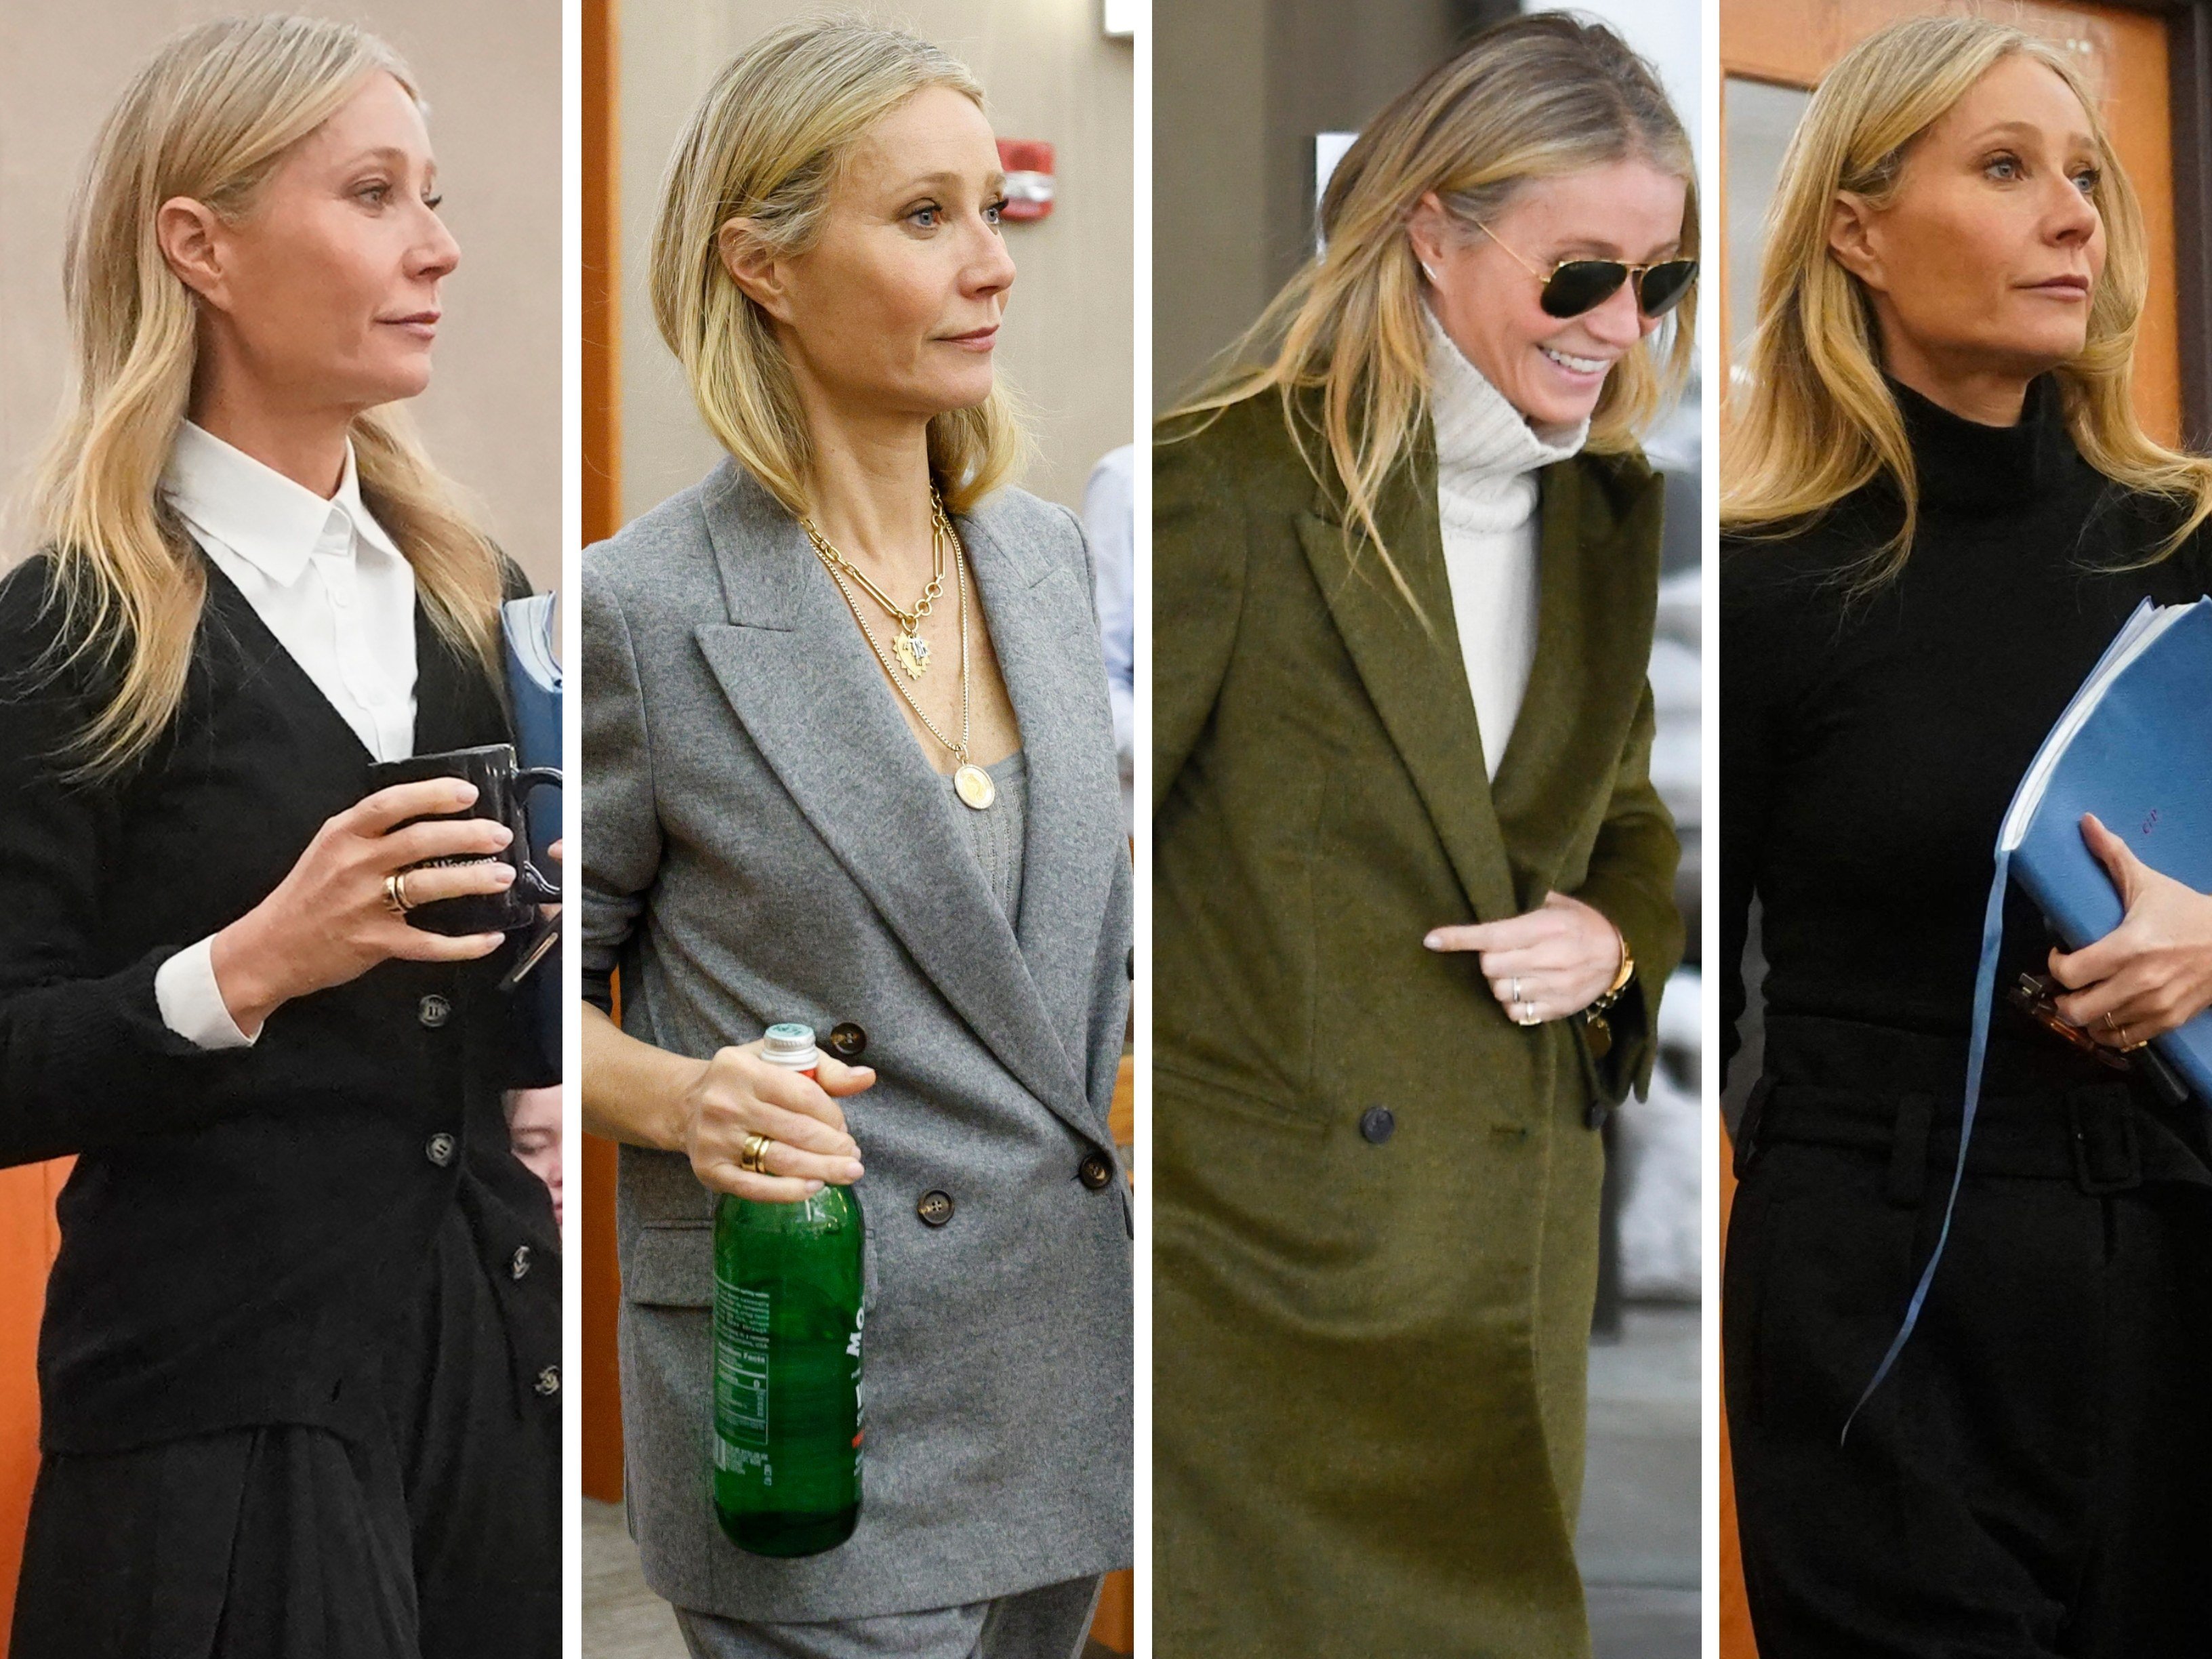 Gwyneth Paltrow showed off her soft power dressing skills during her civil court case involving a 2016 ski accident. Photos: AP, AFP